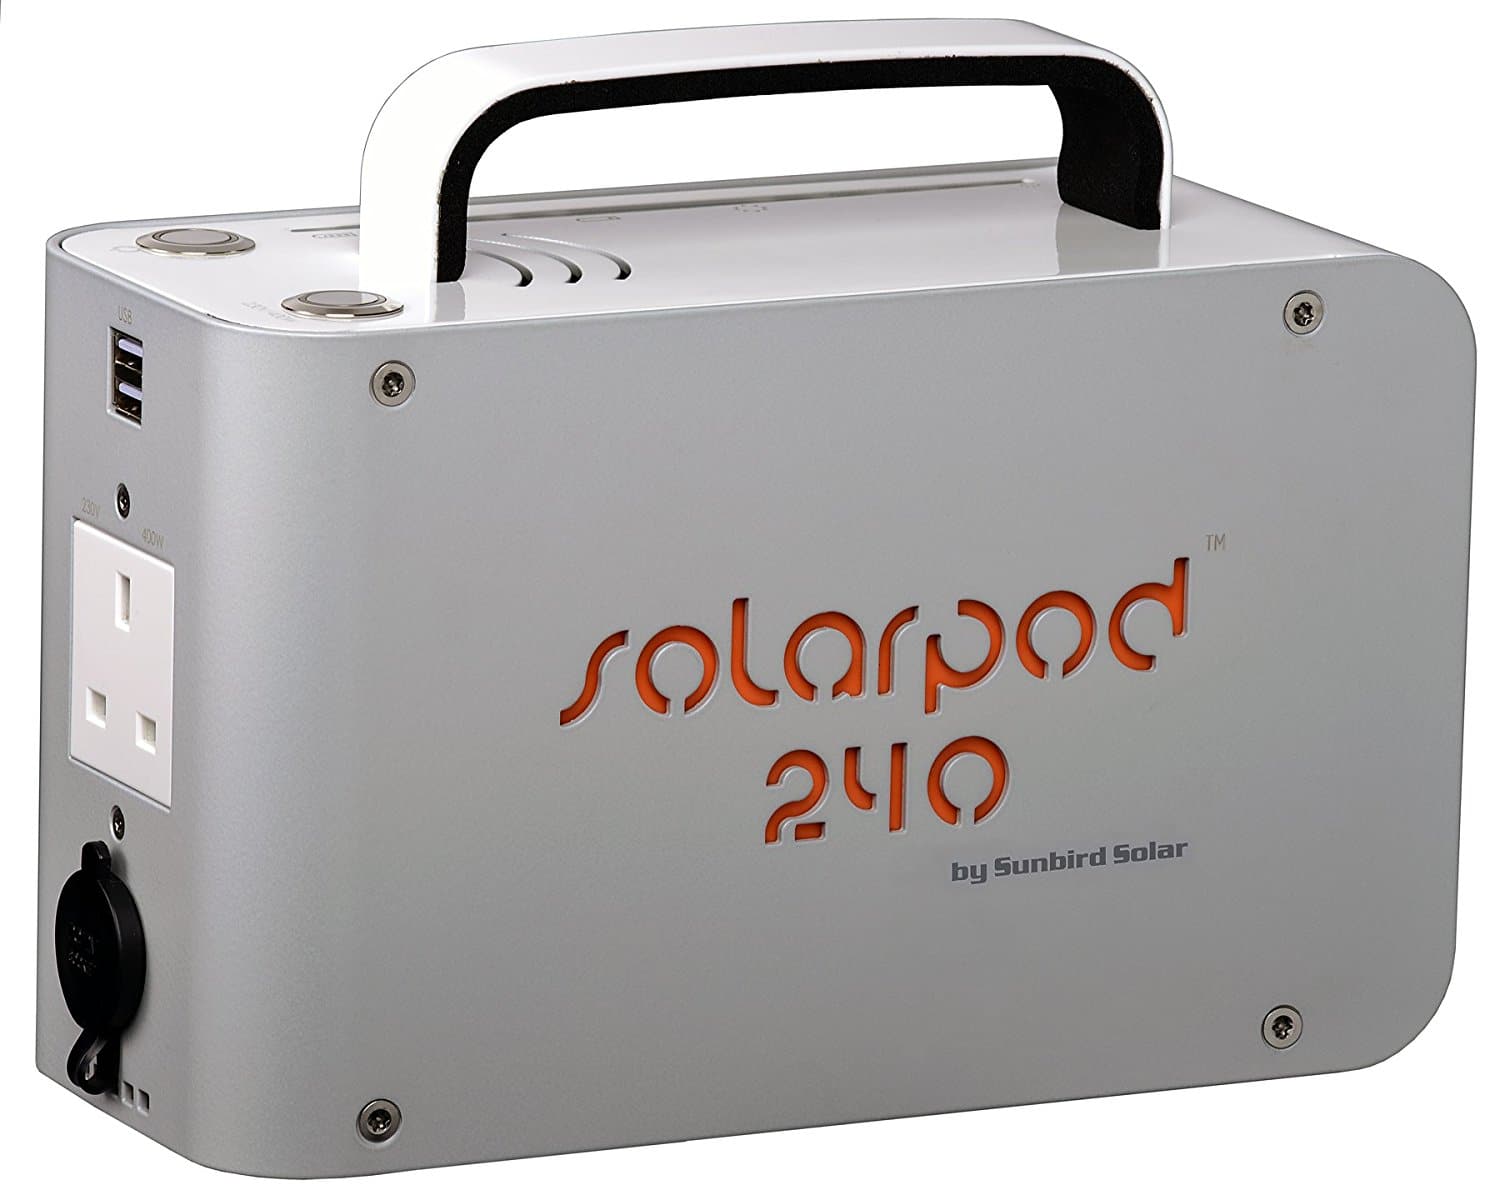 Review of Solarpod 240 Portable Solar Generator Battery Pack